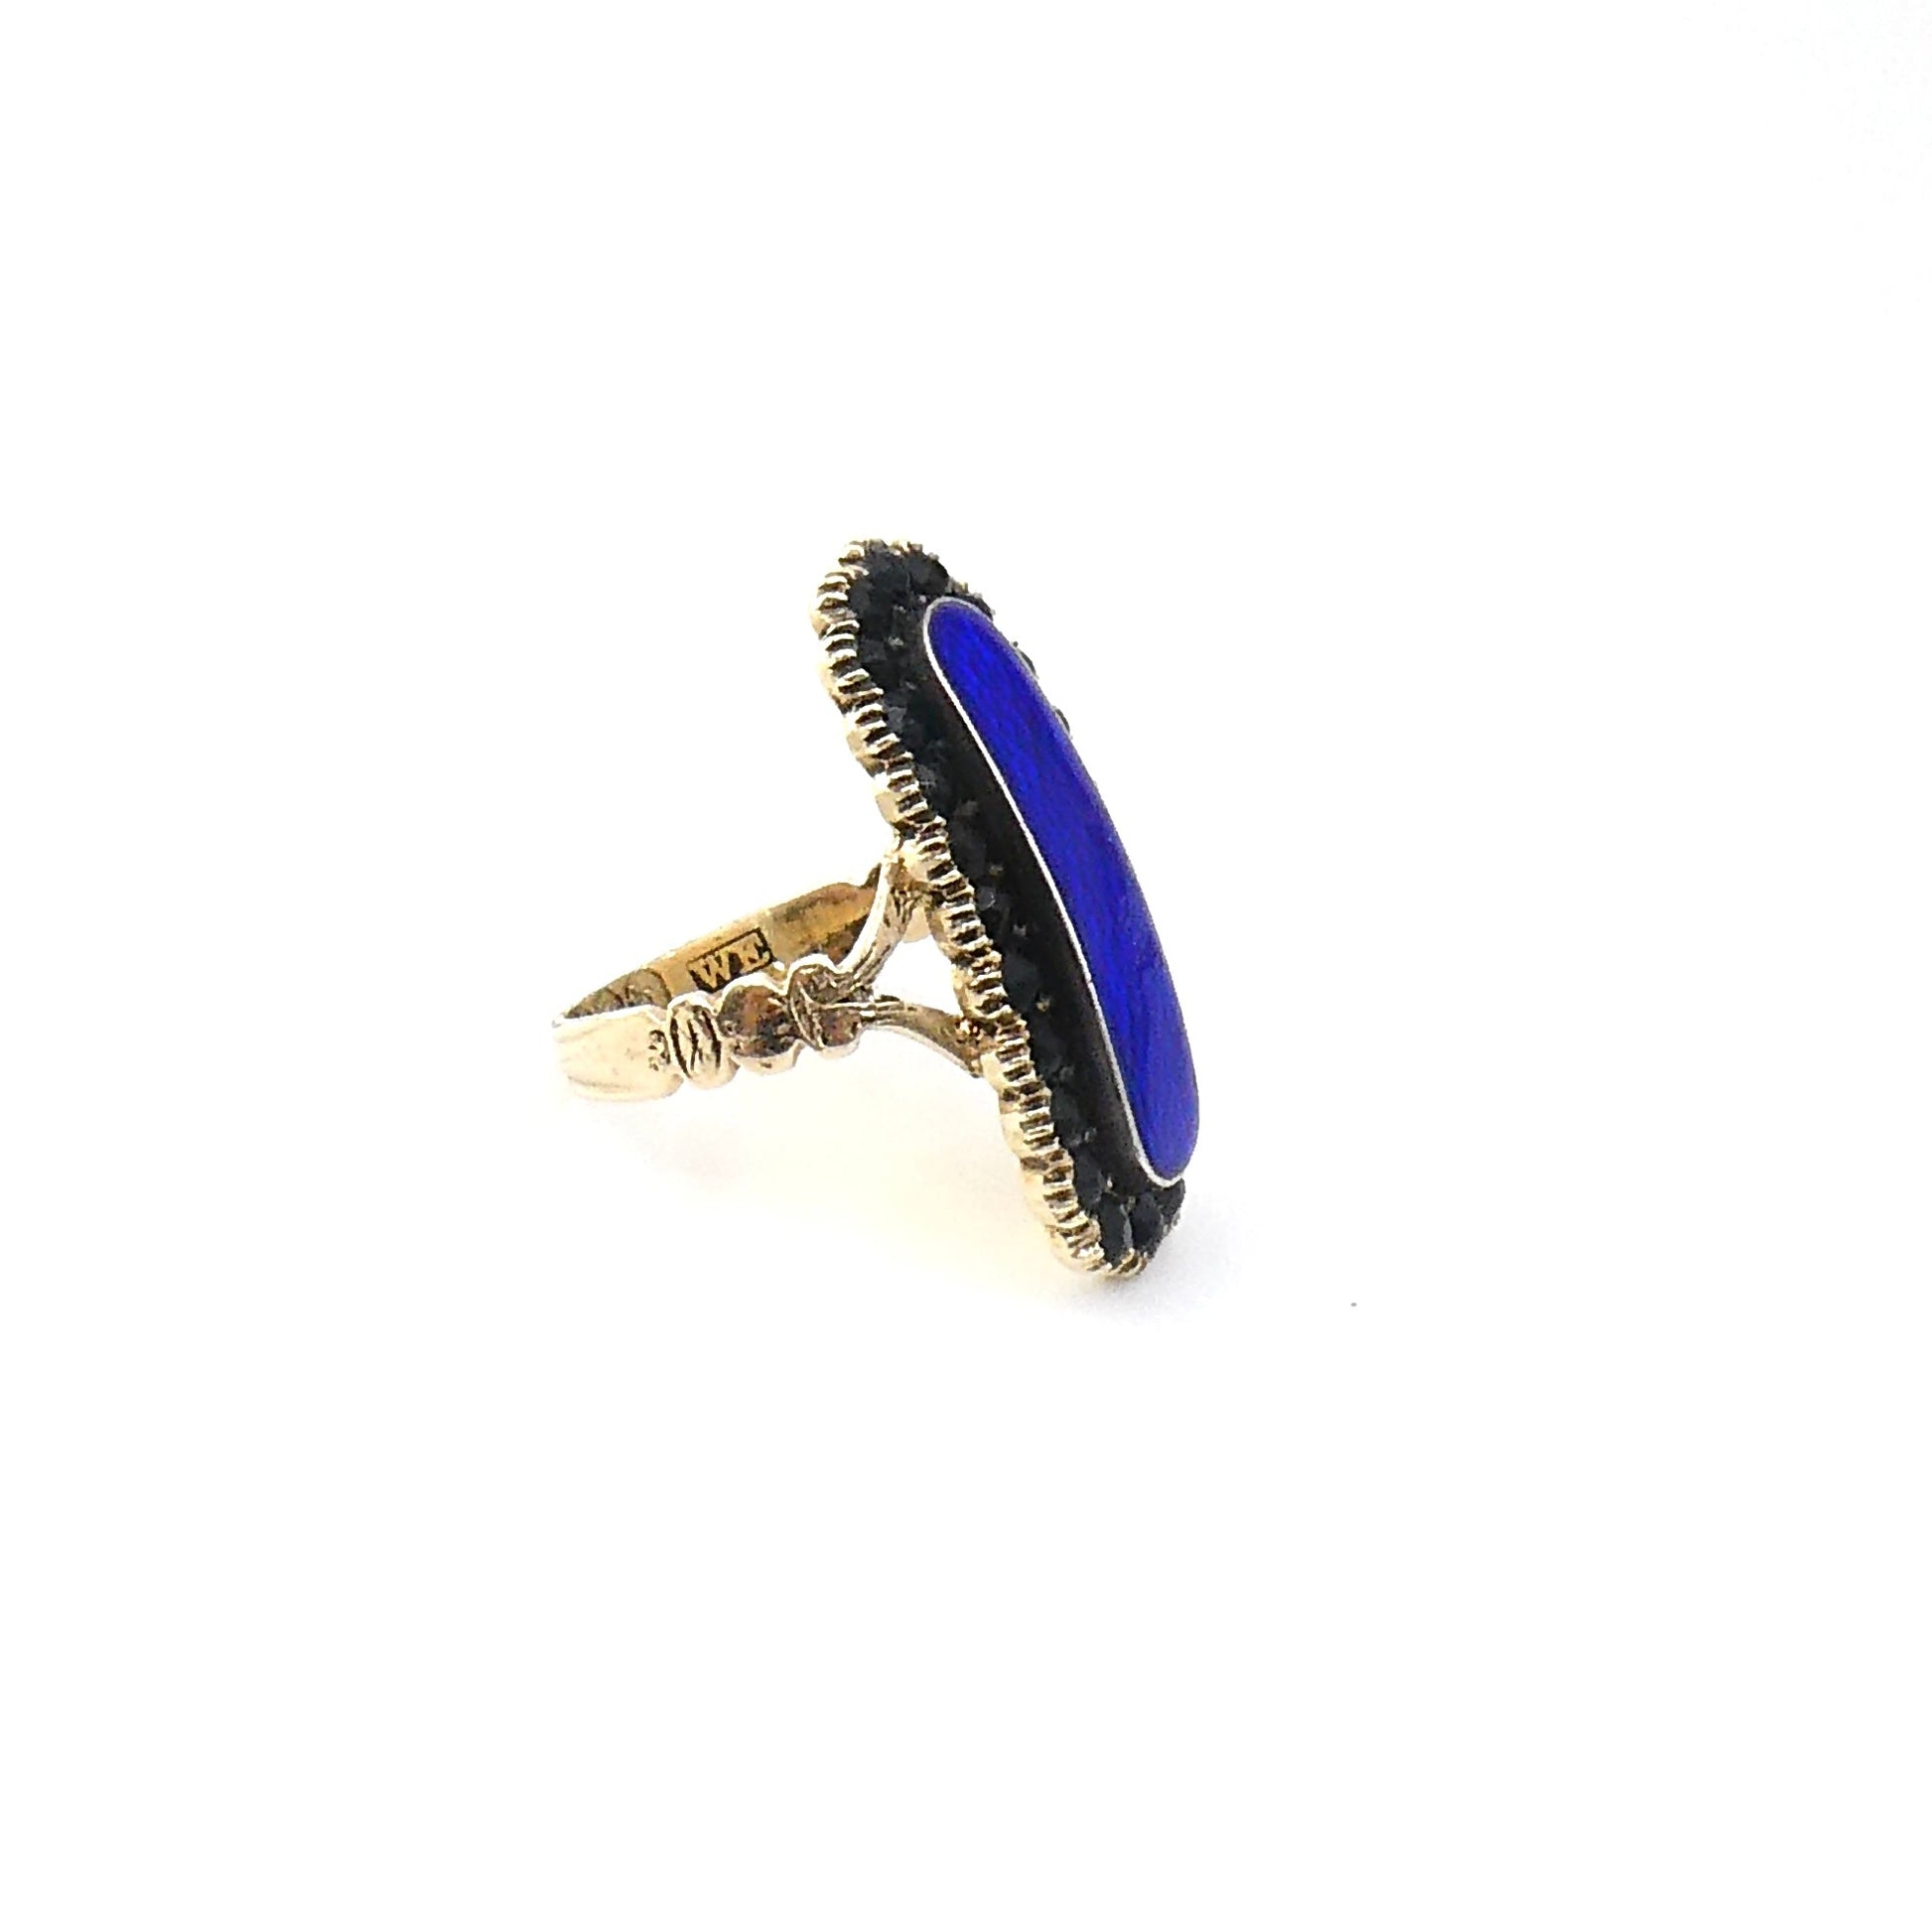 Antique blue enamel and jet ring, an adapted piece, a unique antique ring inscribed 1822 - Collected